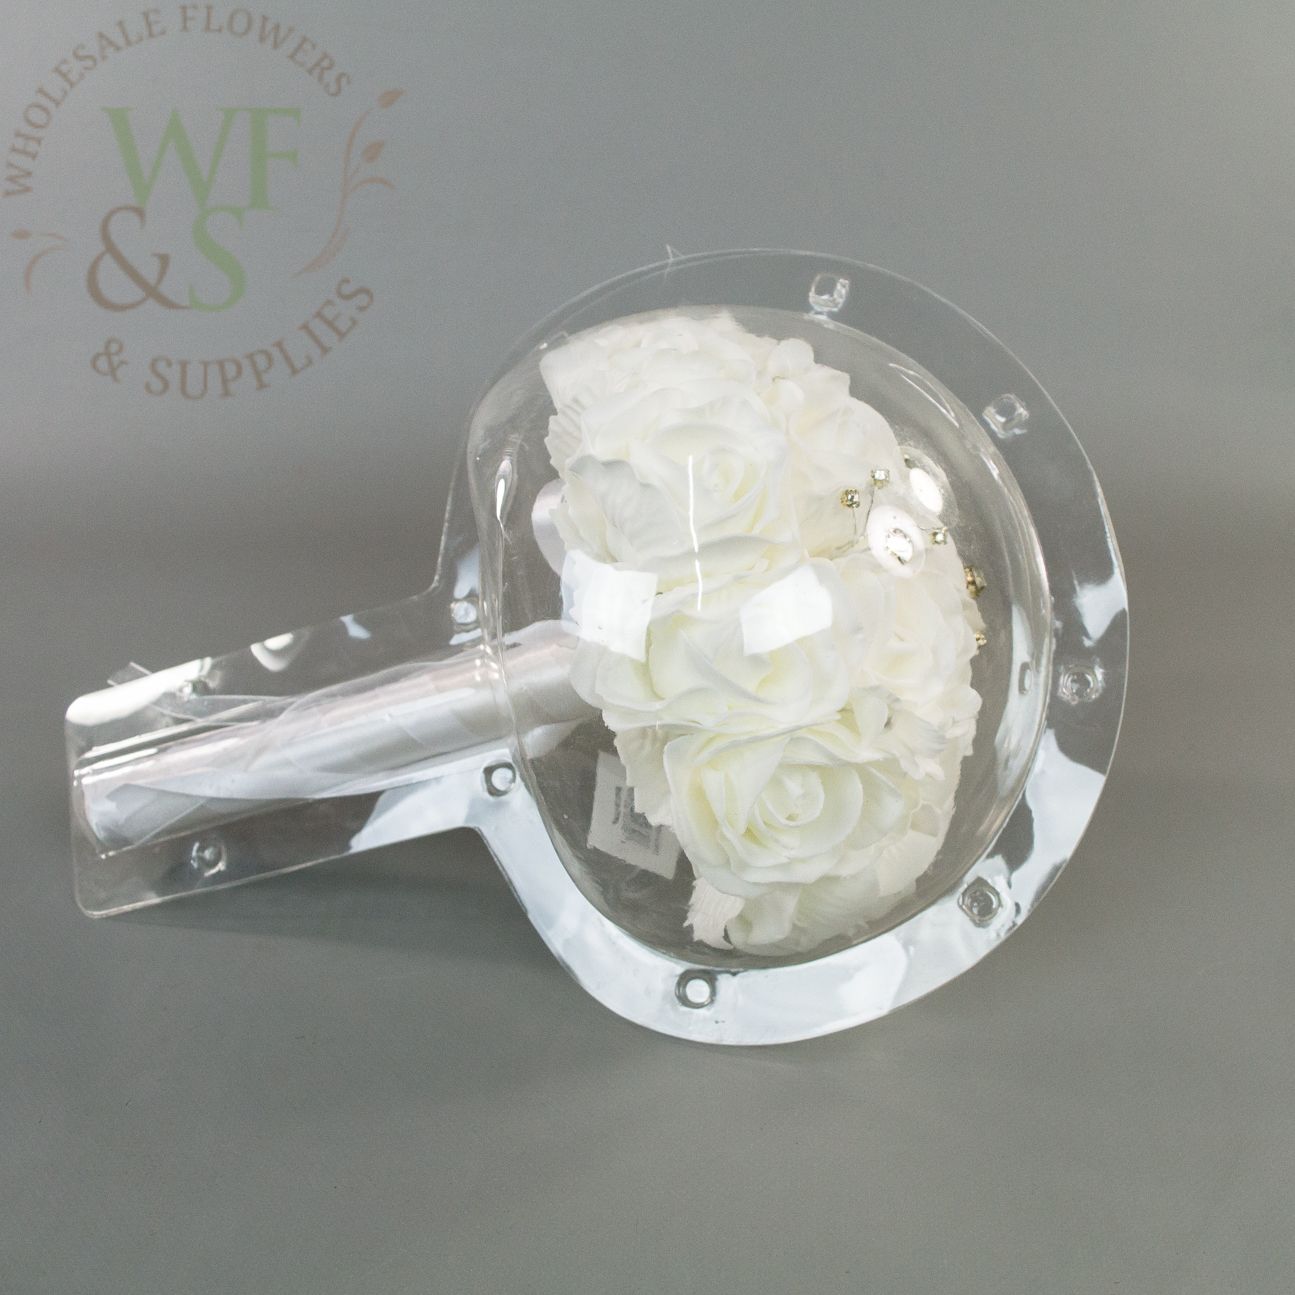 Wedding Bouquet White Roses Rhinestone Ornaments and White Pearls